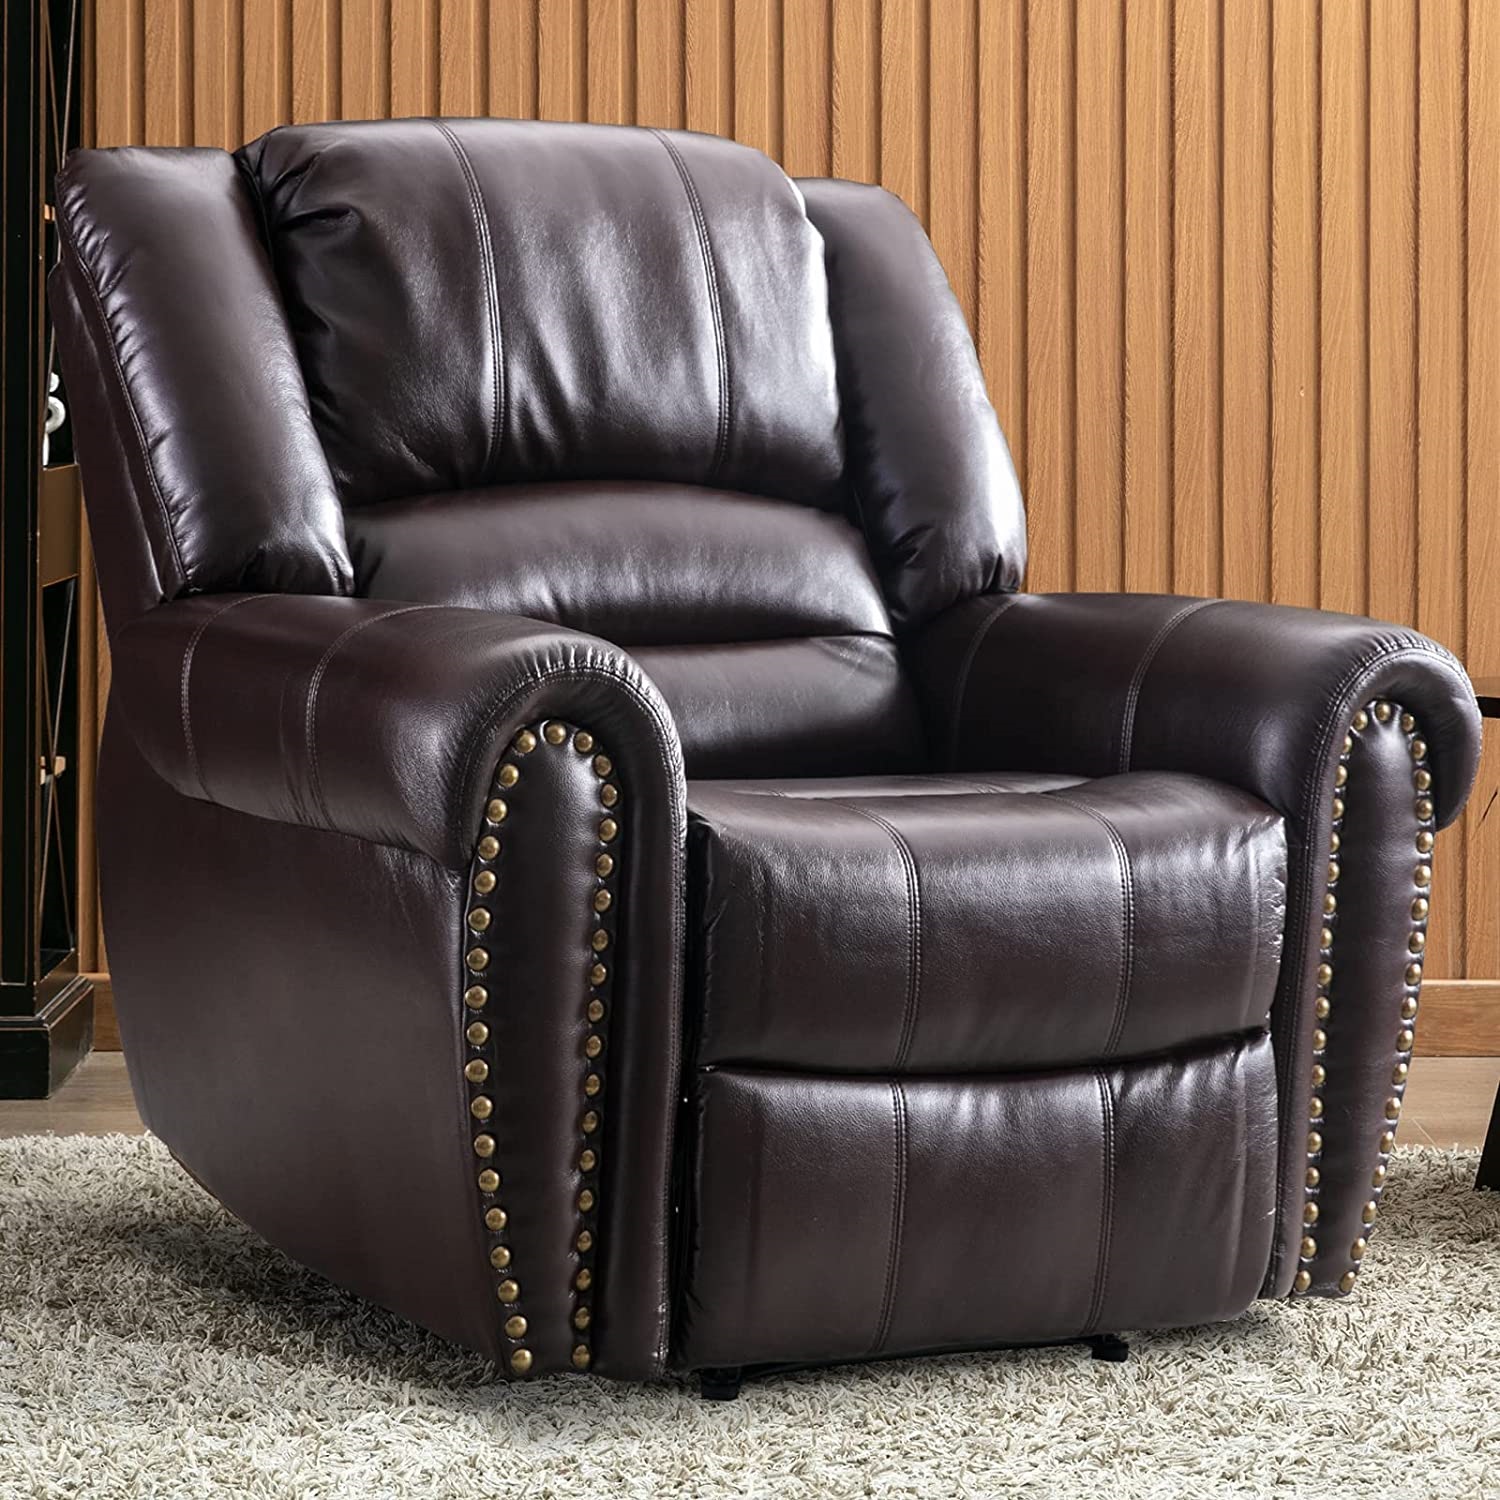 CANMOV Leather Recliner Chair, Classic and Traditional Manual Recliner Chair with Comfortable Arms and Back Single Sofa for Living Room